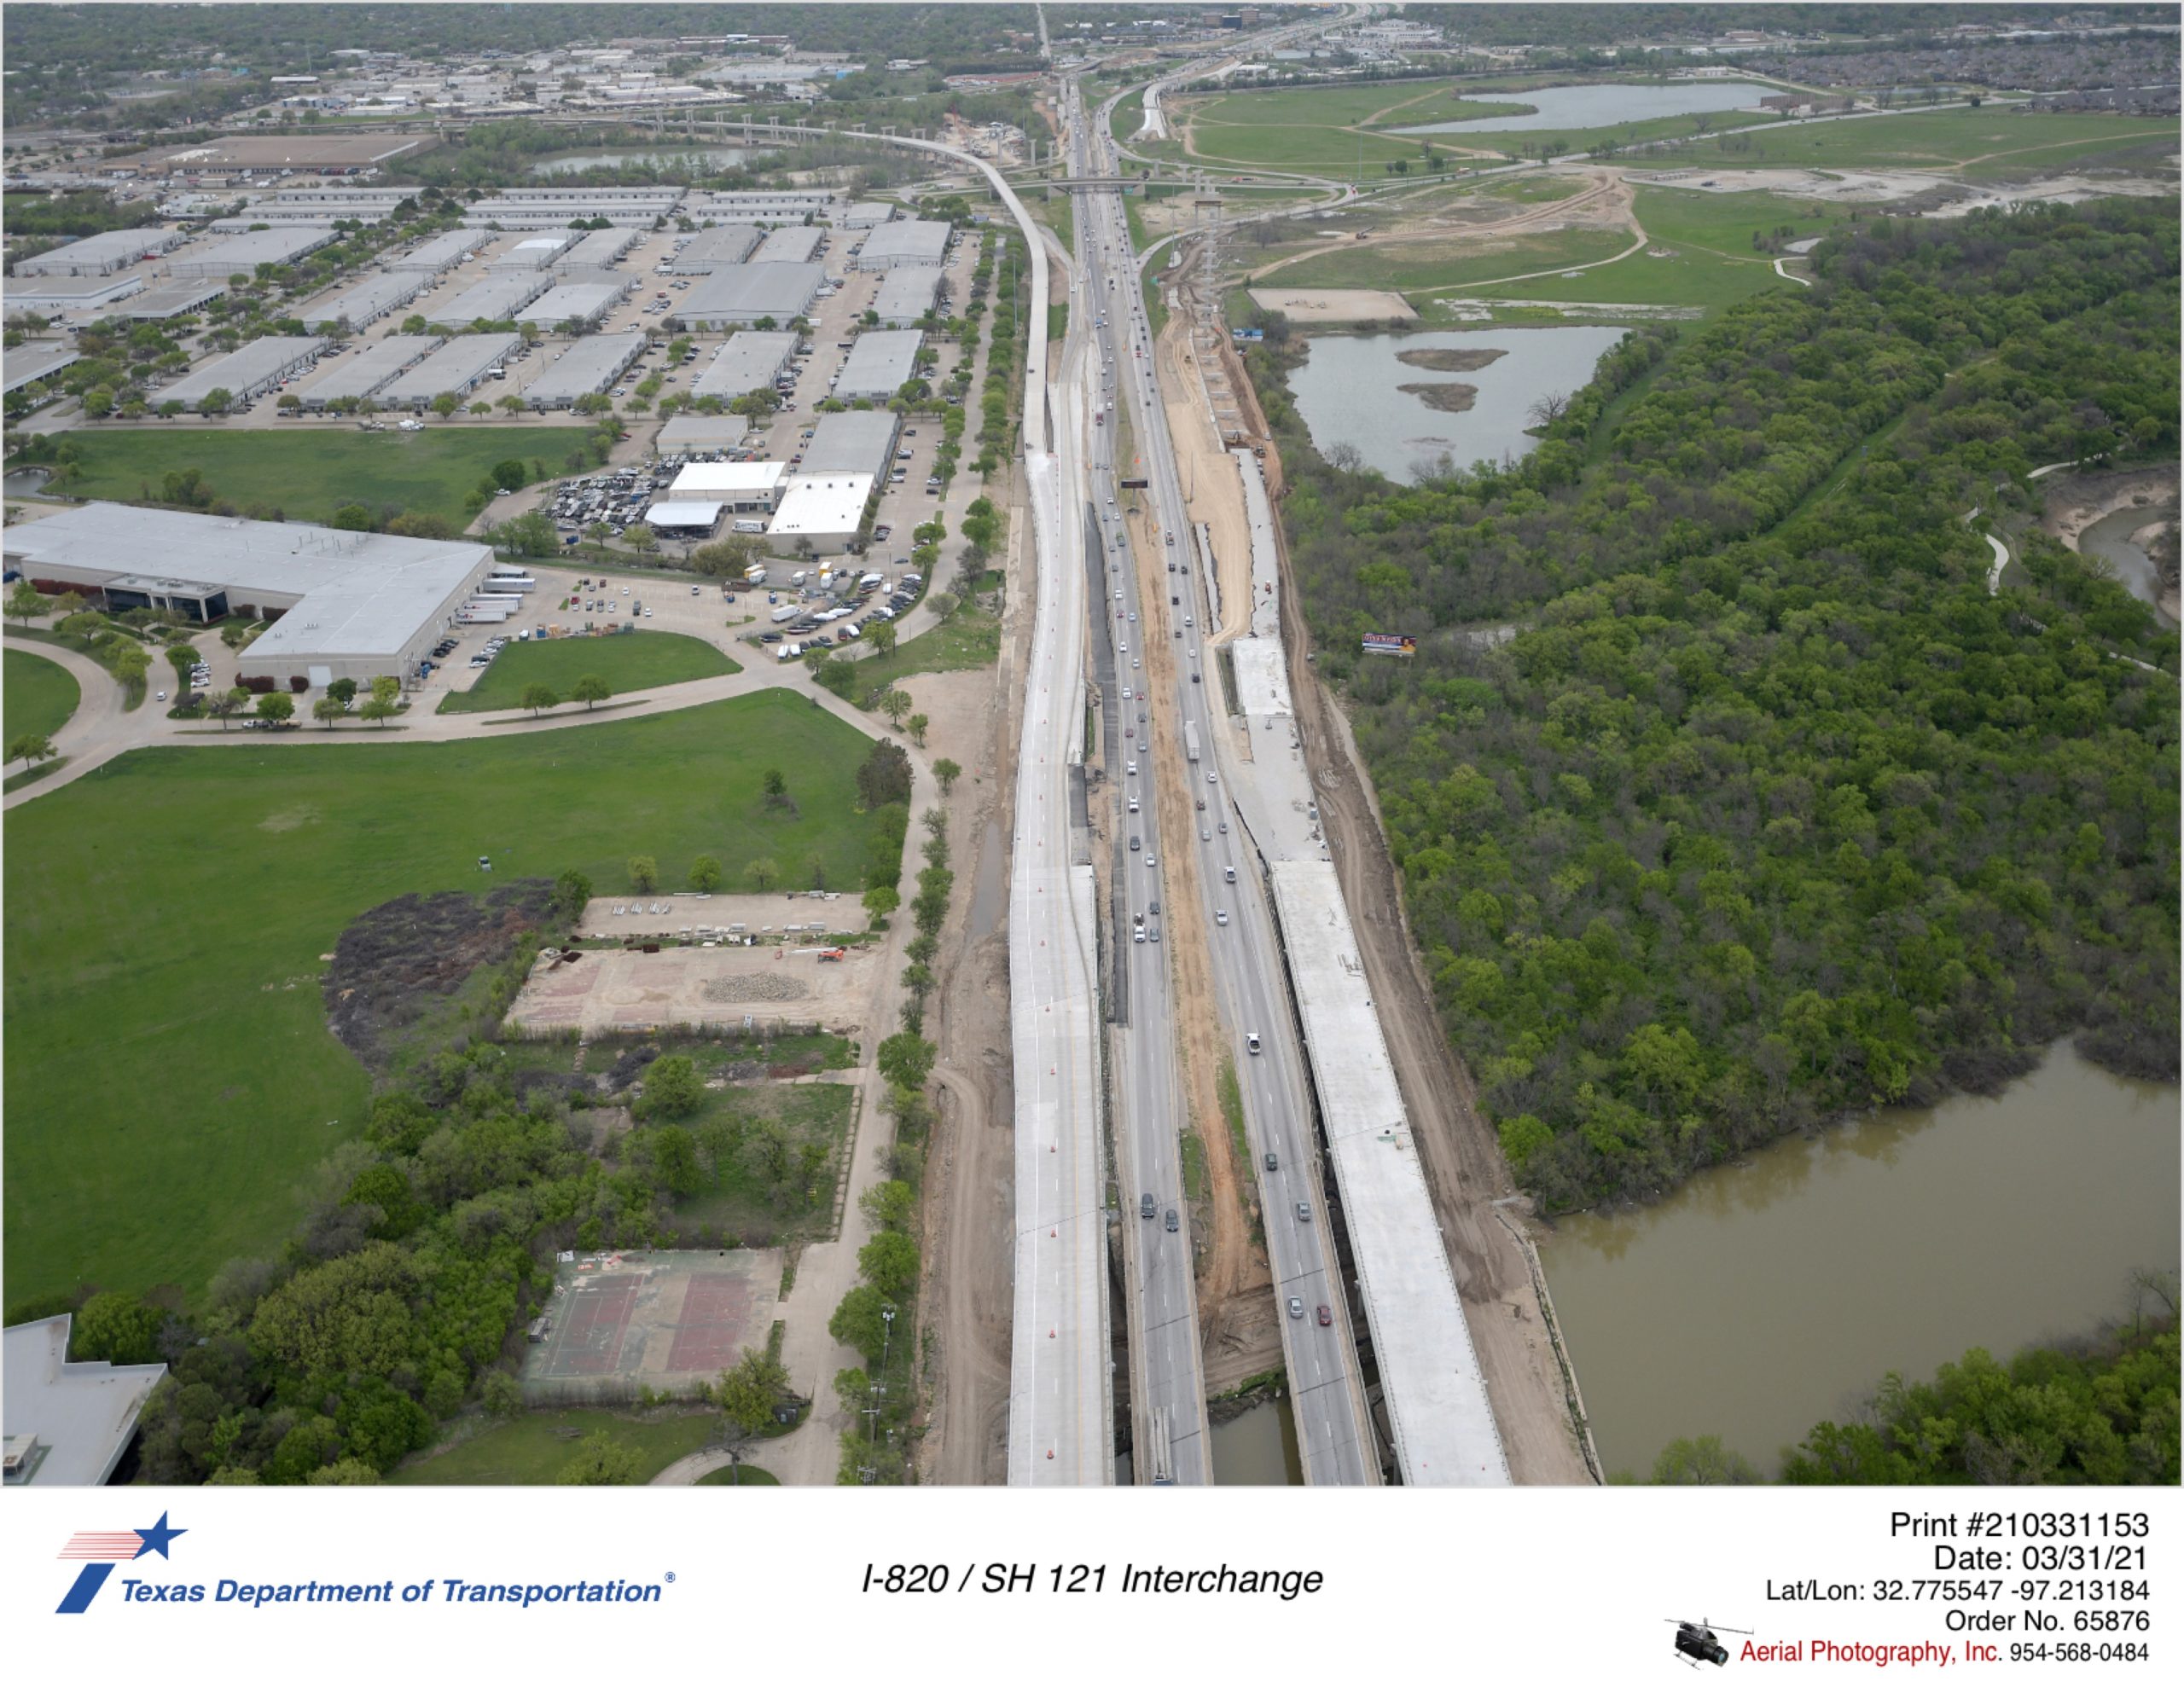 I-820 looking north over the Trinity River showing new bridges over the floodplain area.